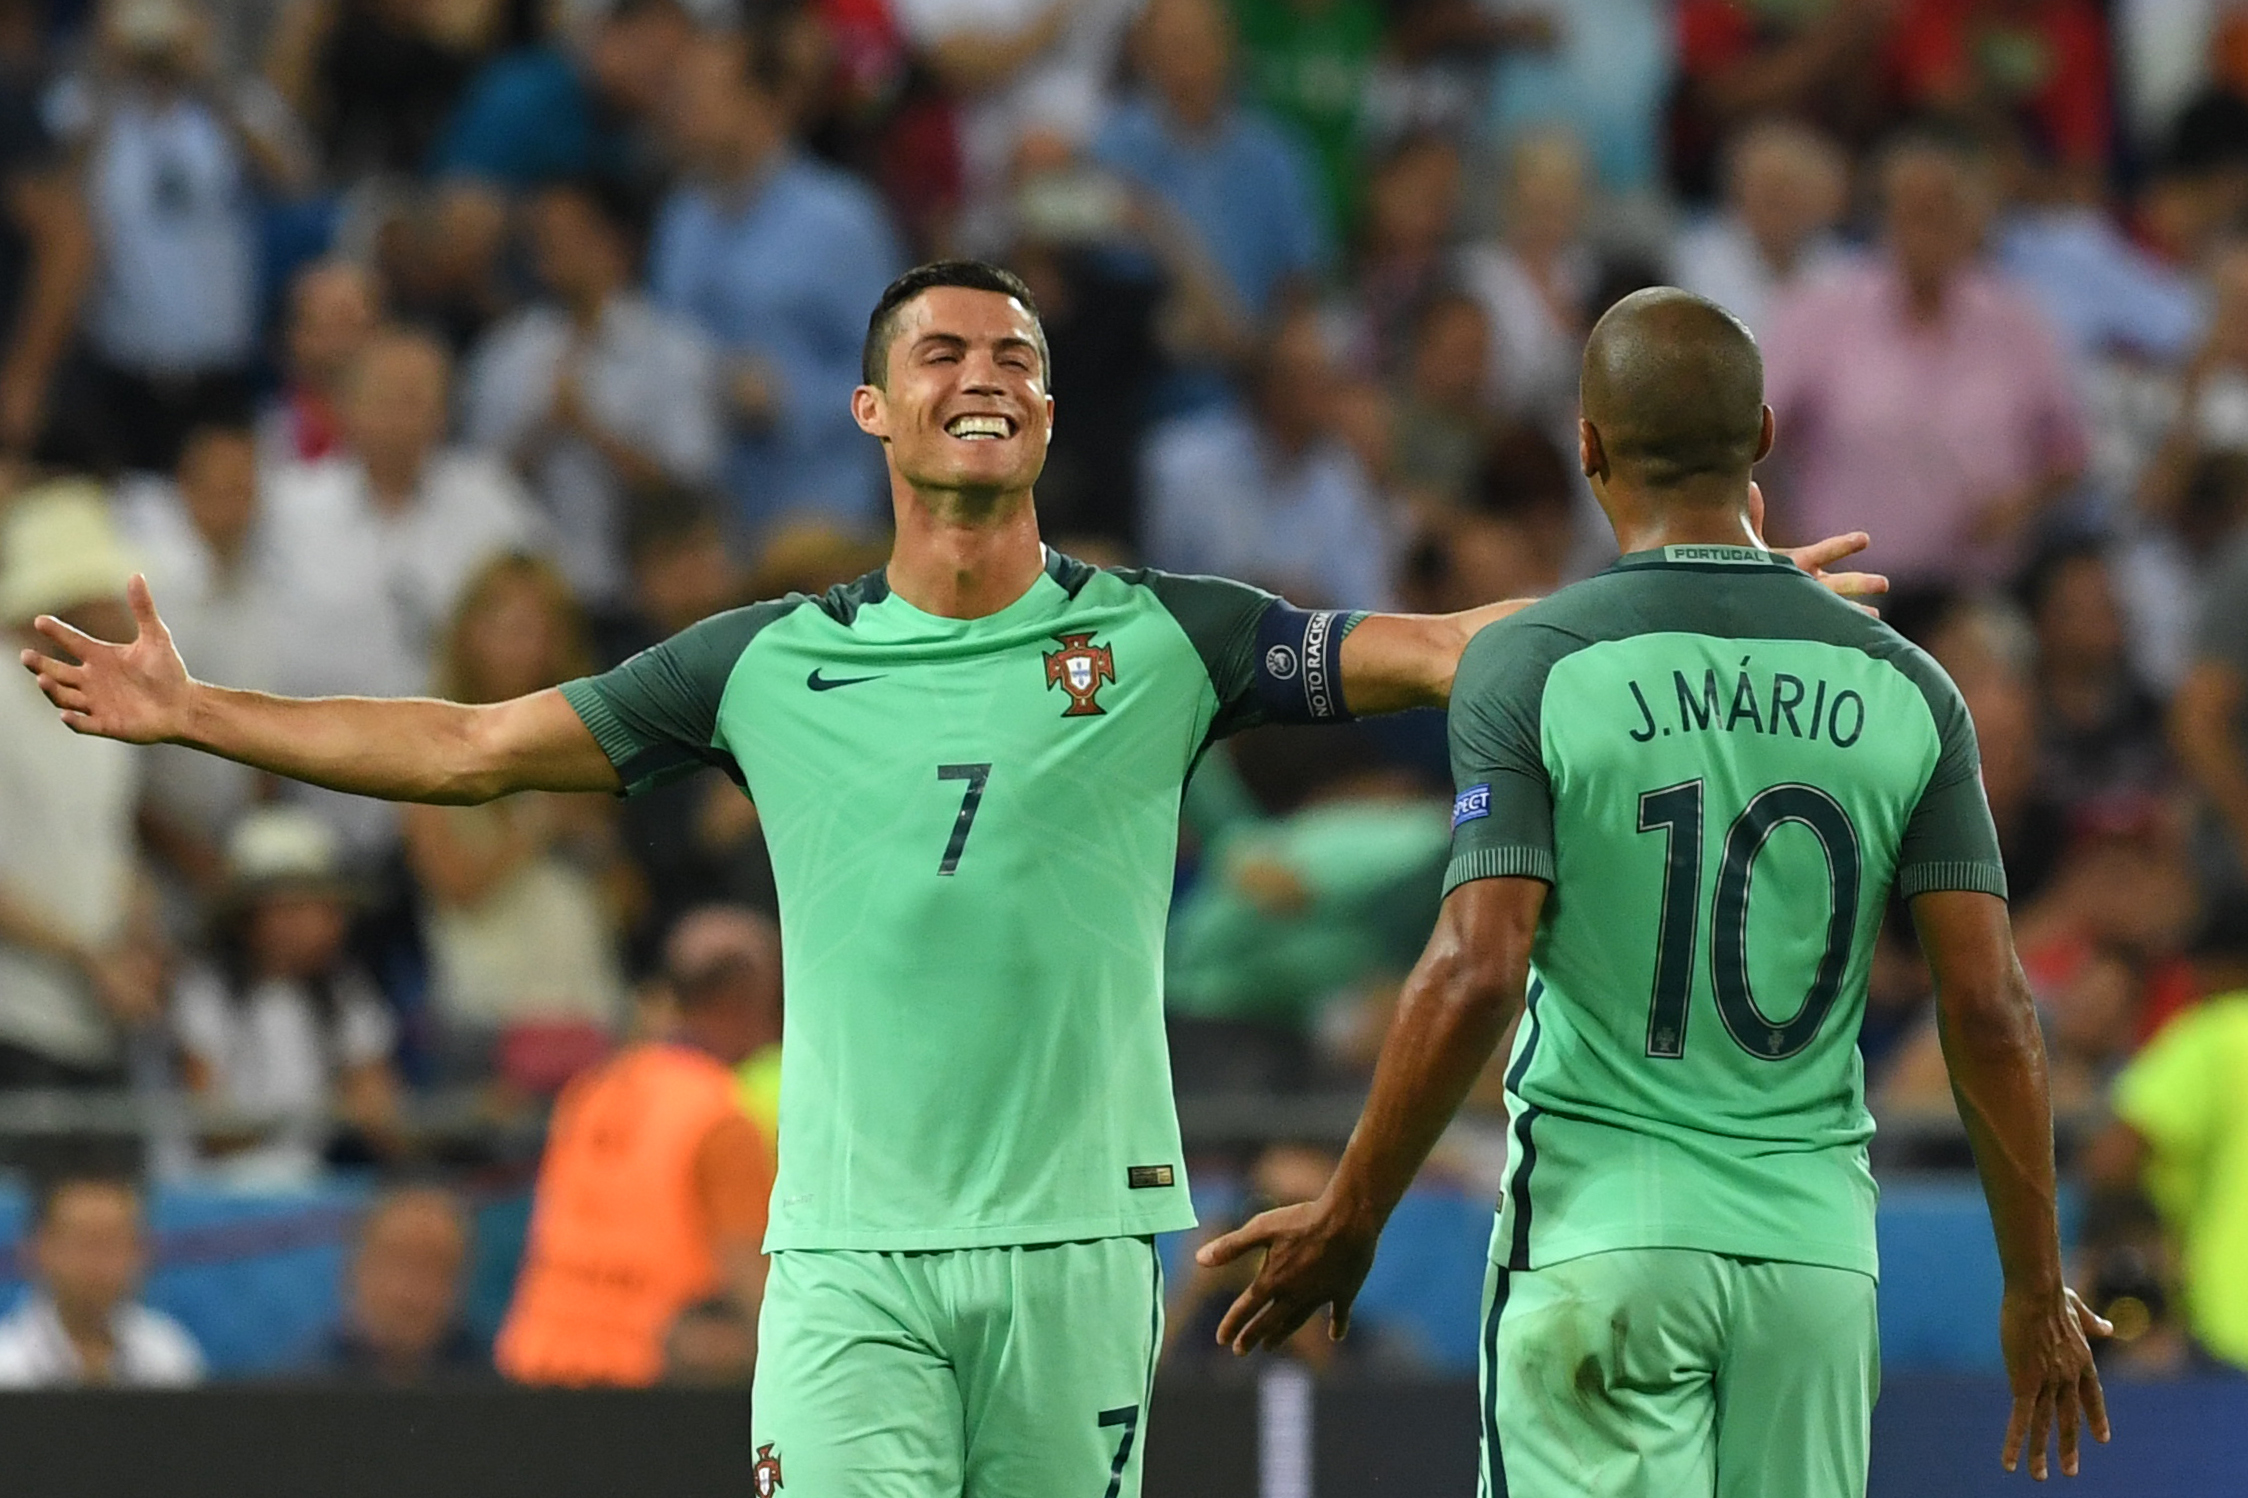 Portugal's forward Cristiano Ronaldo (L) celebrates at the end of the Euro 2016 semi-final football match between Portugal and Wales at the Parc Olympique Lyonnais stadium in Décines-Charpieu, near Lyon, on July 6, 2016.
 / AFP / Francisco LEONG        (Photo credit should read FRANCISCO LEONG/AFP/Getty Images)